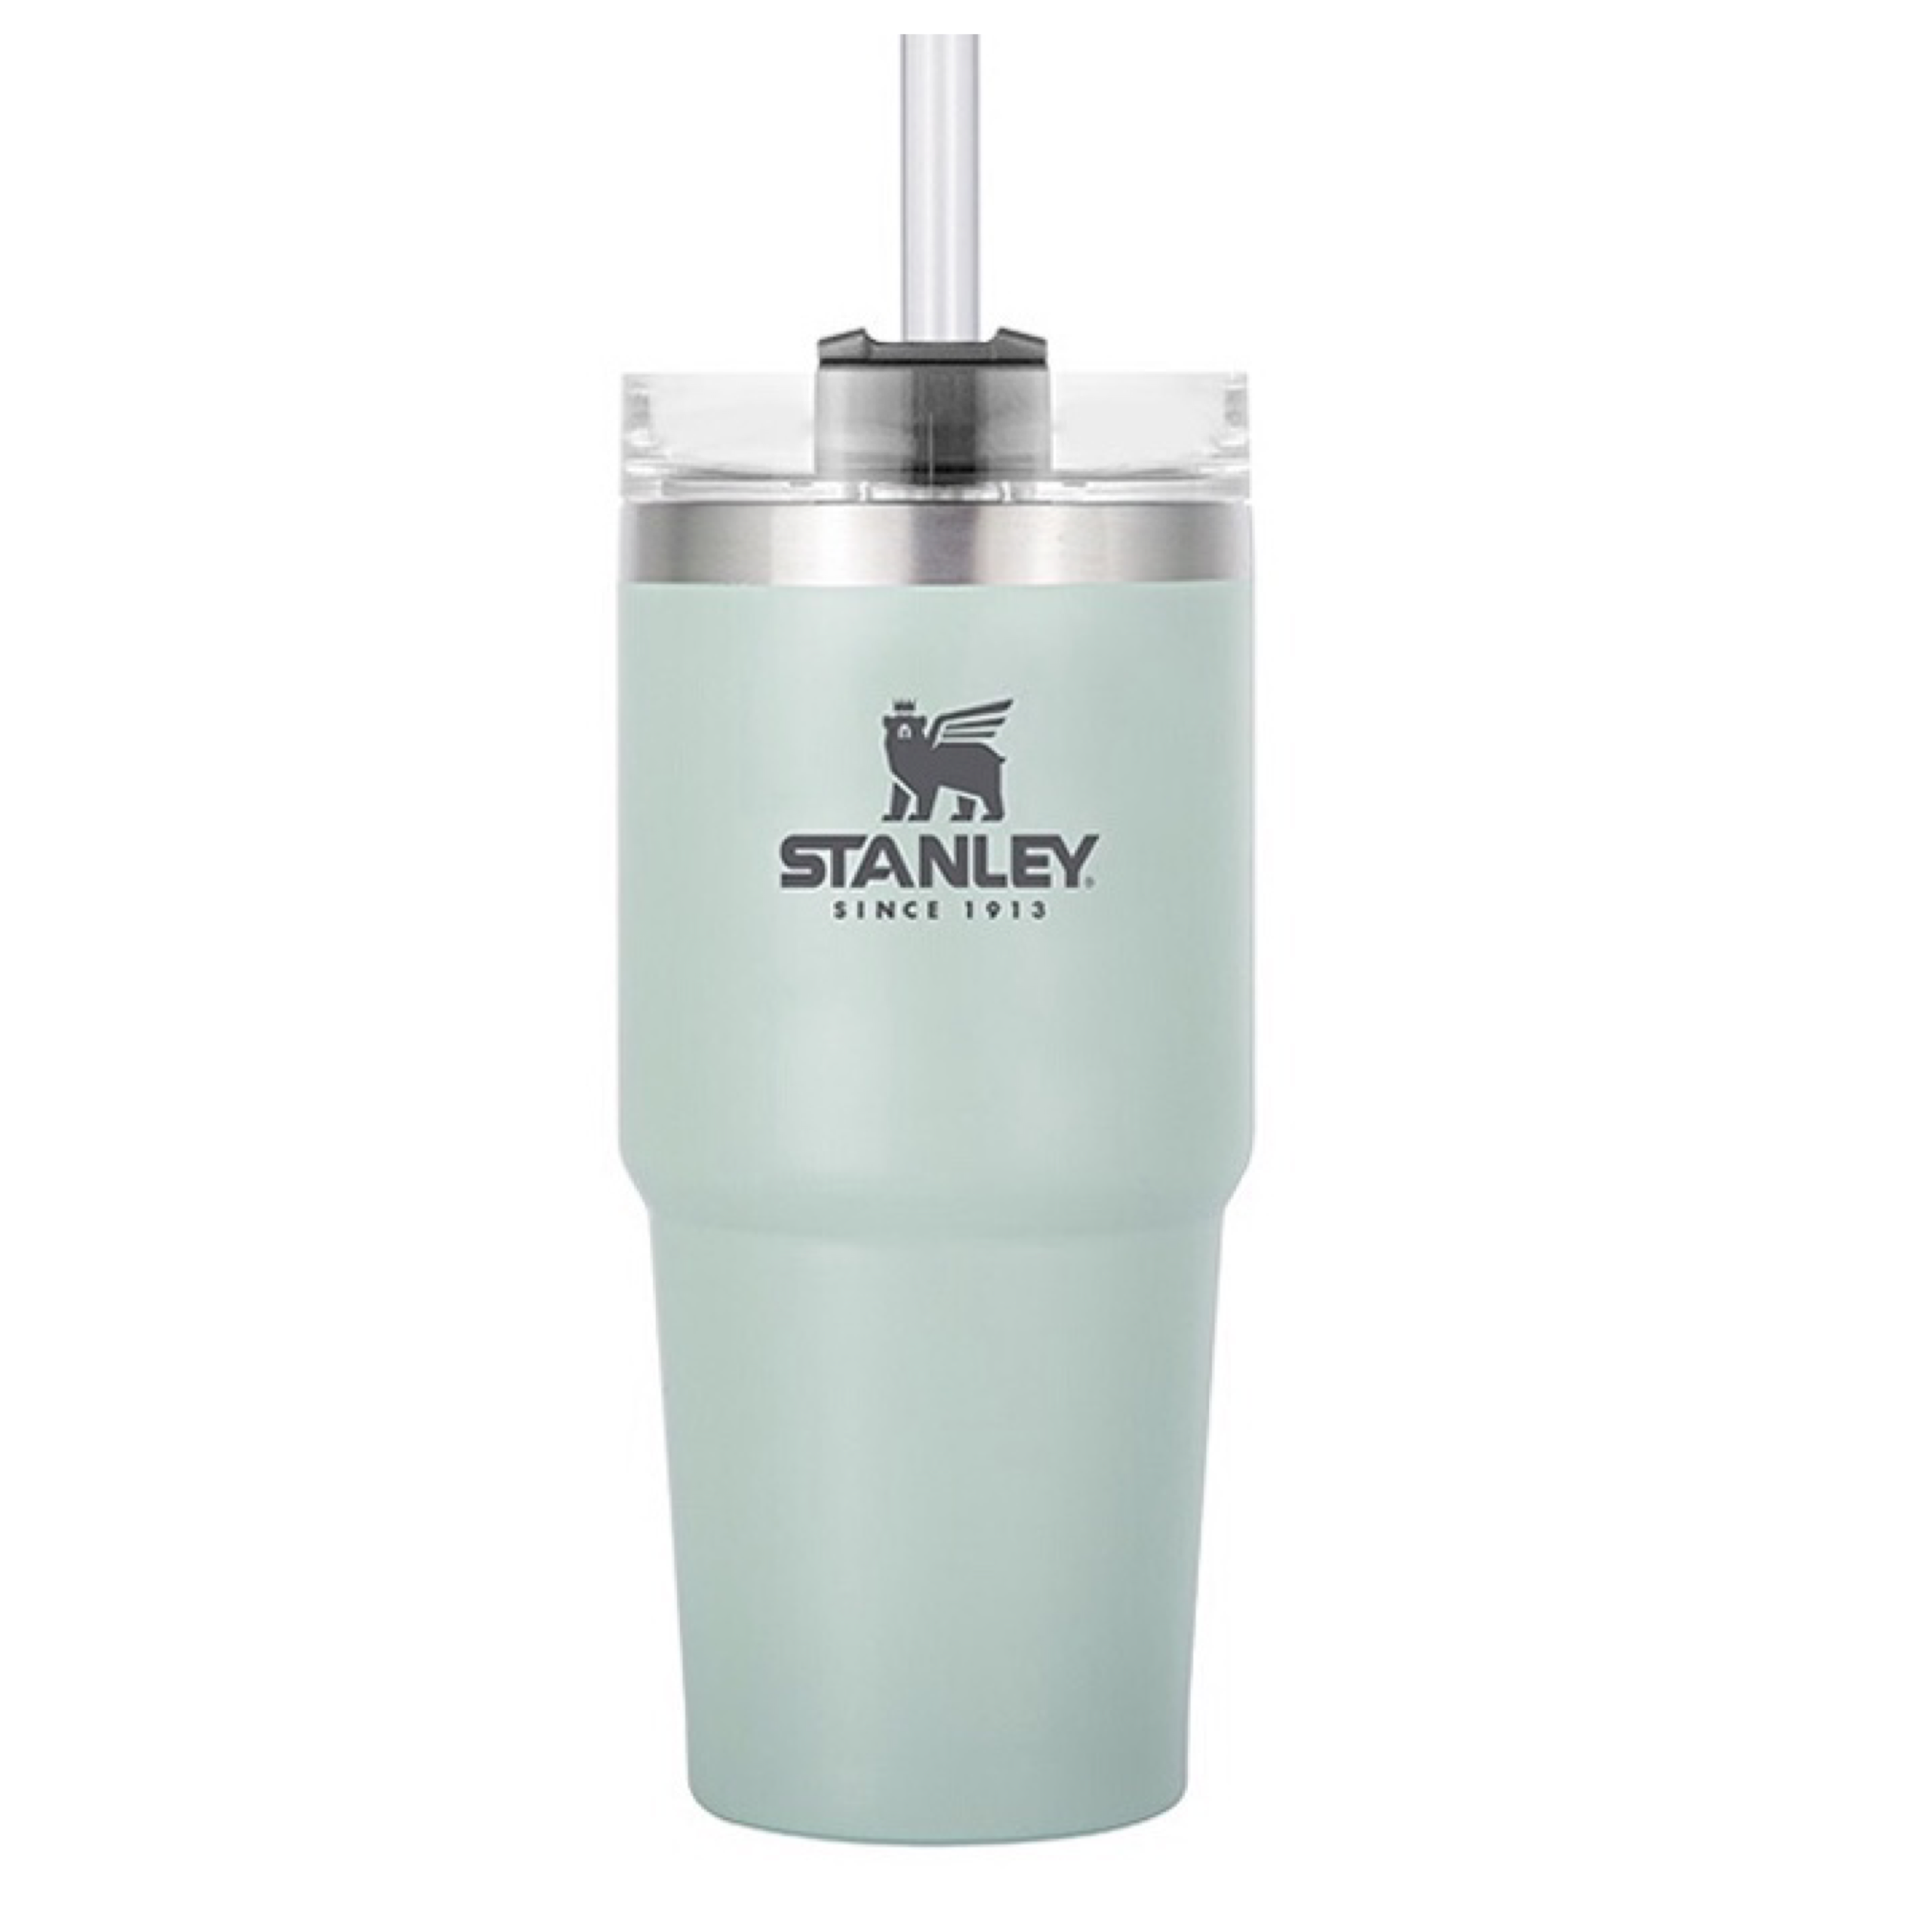 40 OZ Adventure Quencher Travel Tumbler with Straw, Stainless Steel  Insulated Mug, Maintains Heat Cold Ice for Hours, for Coffee Beer Water  Beverages ( Not Stanley ) 